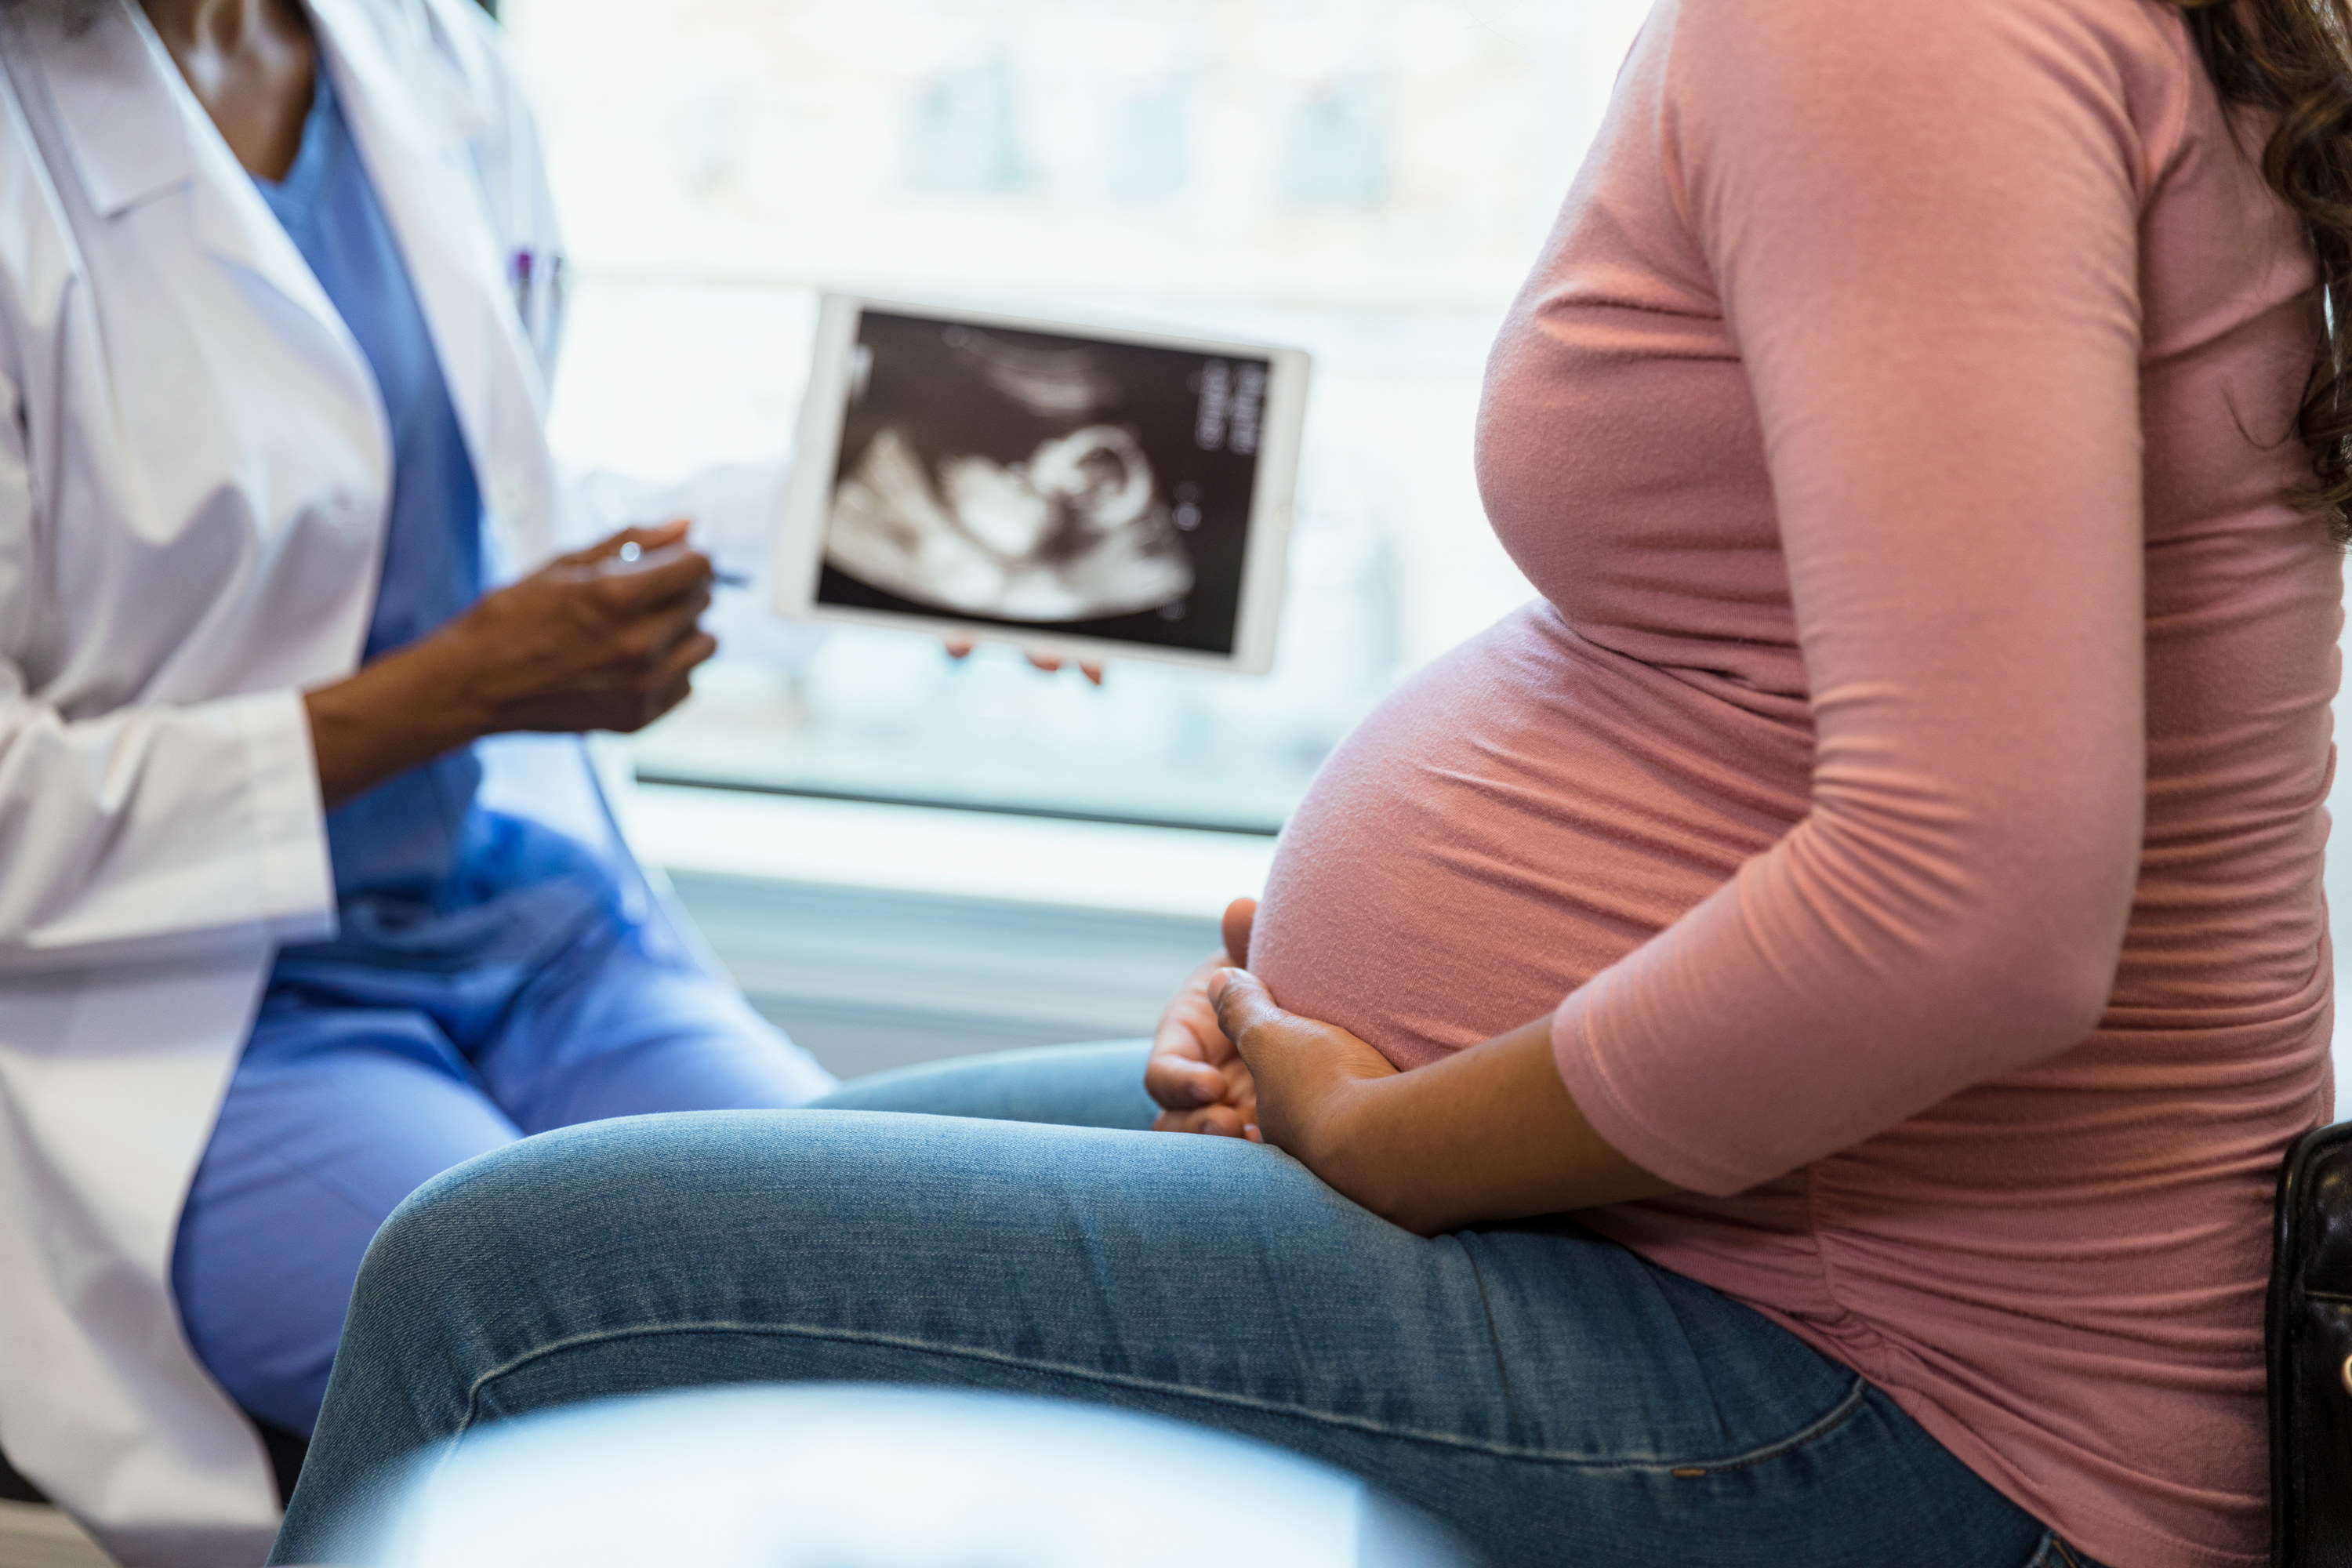 unrecognizable pregnant woman in the foreground as the unrecognizable doctor shows her an ultrasound on a digital tablet in the background